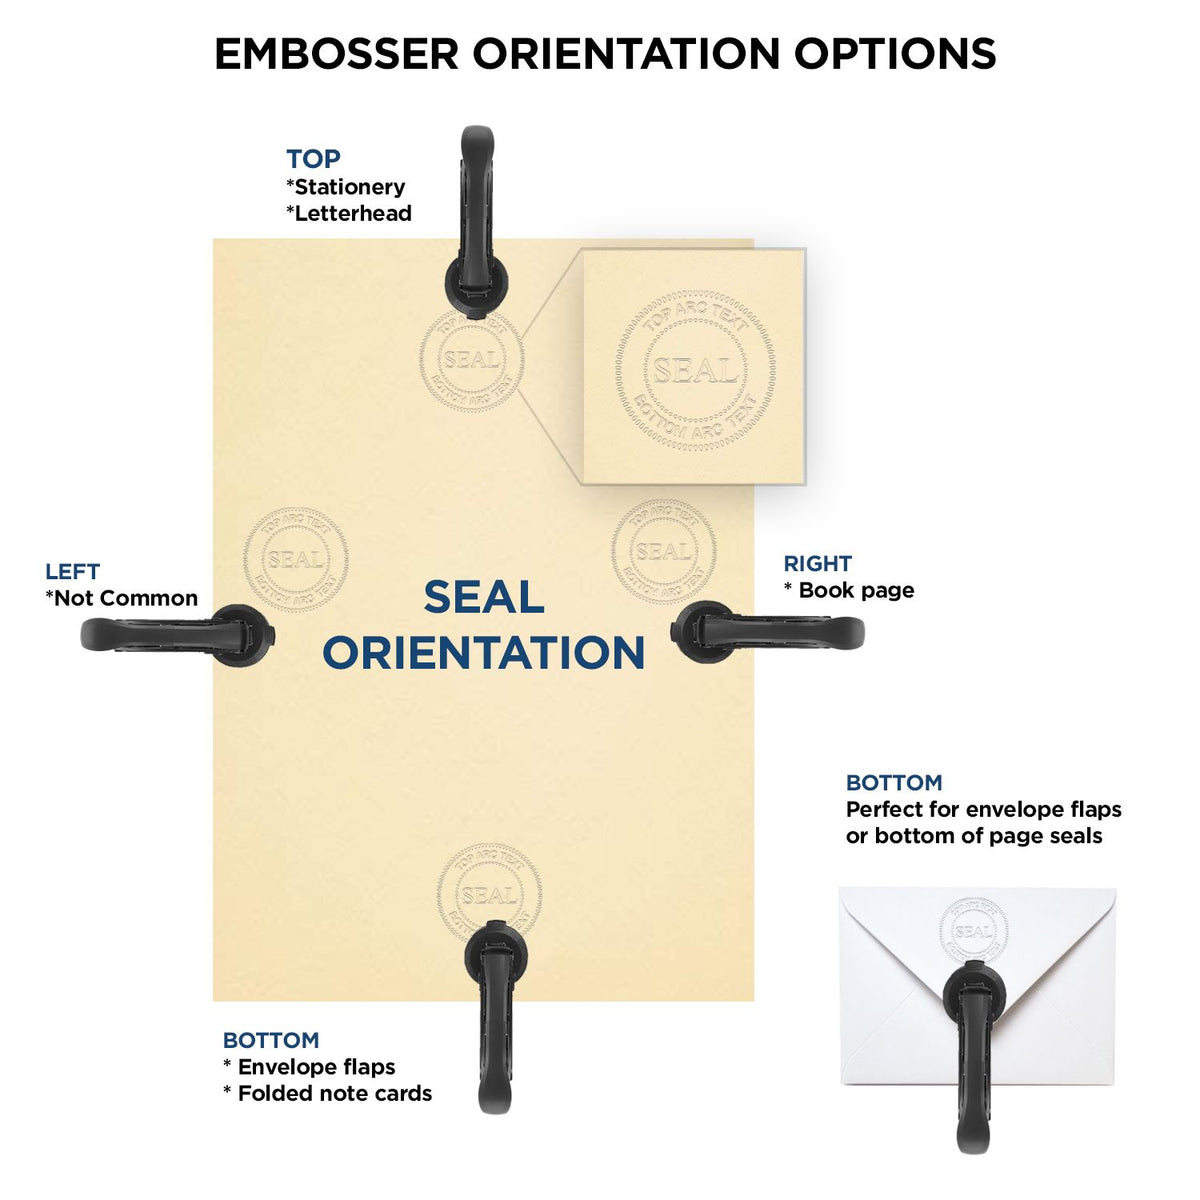 An infographic for the Delaware Desk Architect Embossing Seal showing embosser orientation, this is showing examples of a top, bottom, right and left insert.